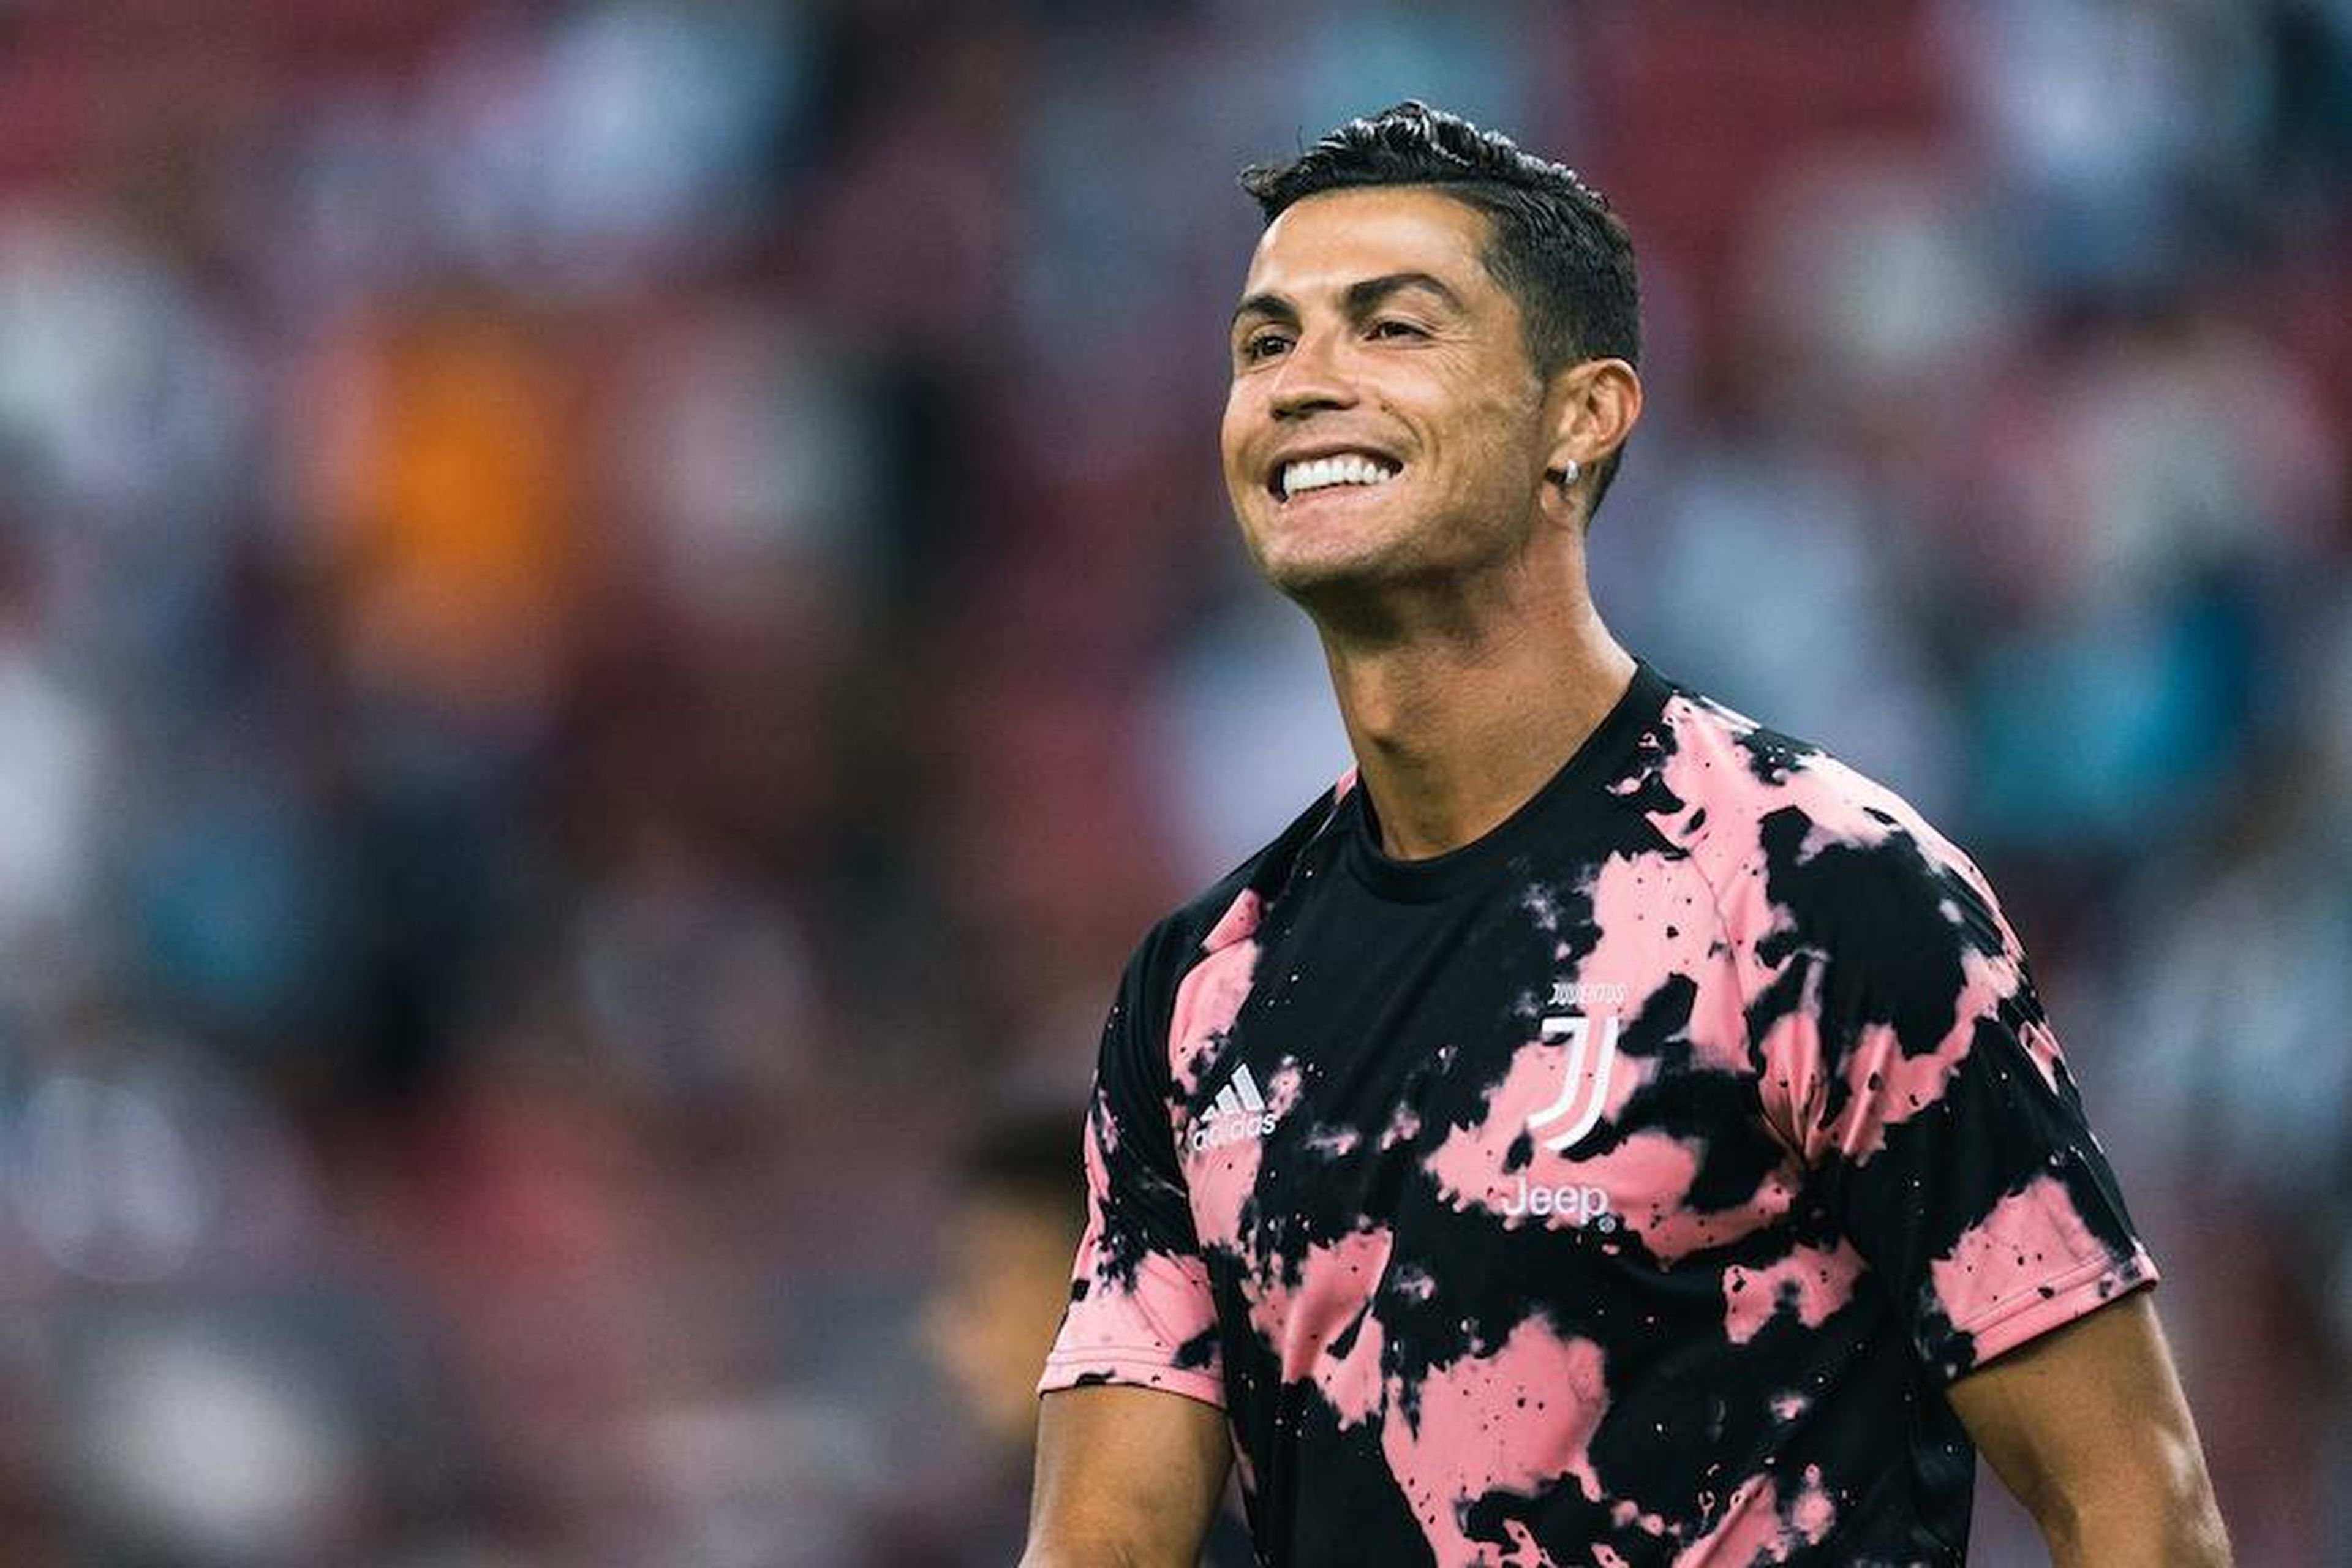 Cristiano Ronaldo, soccer superstar, and the ultimate influencer.